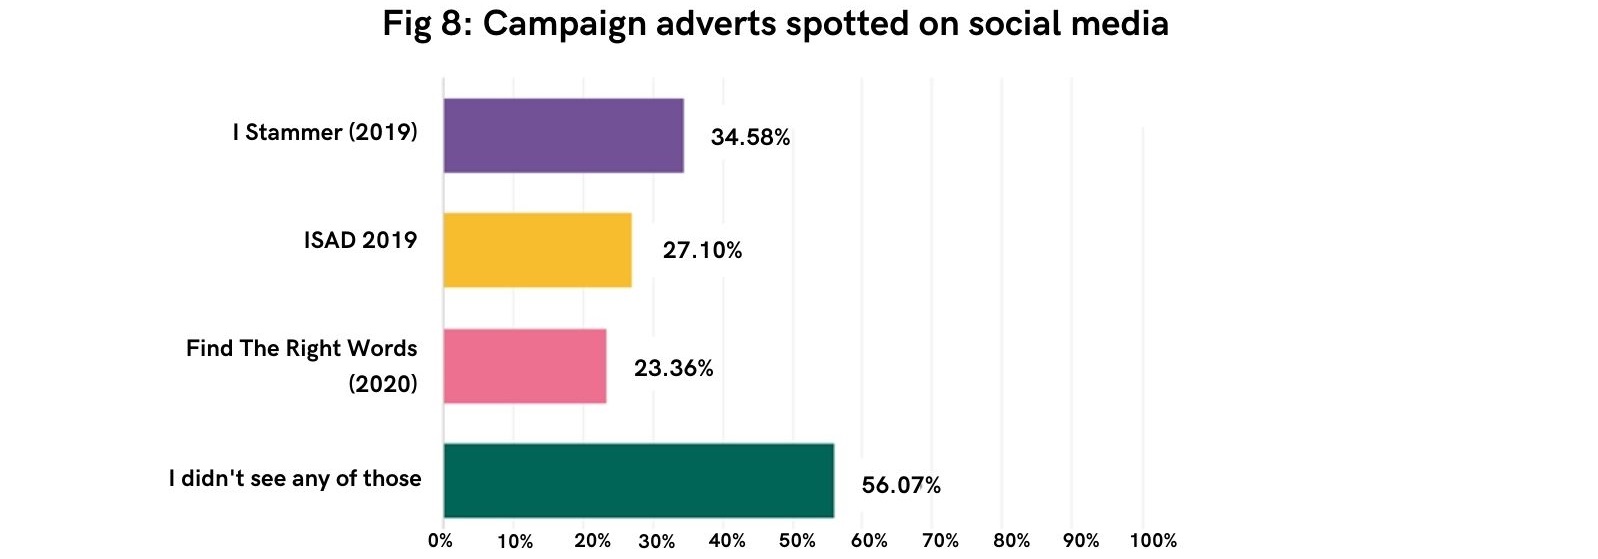 A bar graph showing how many survey respondents saw a STAMMA campaign